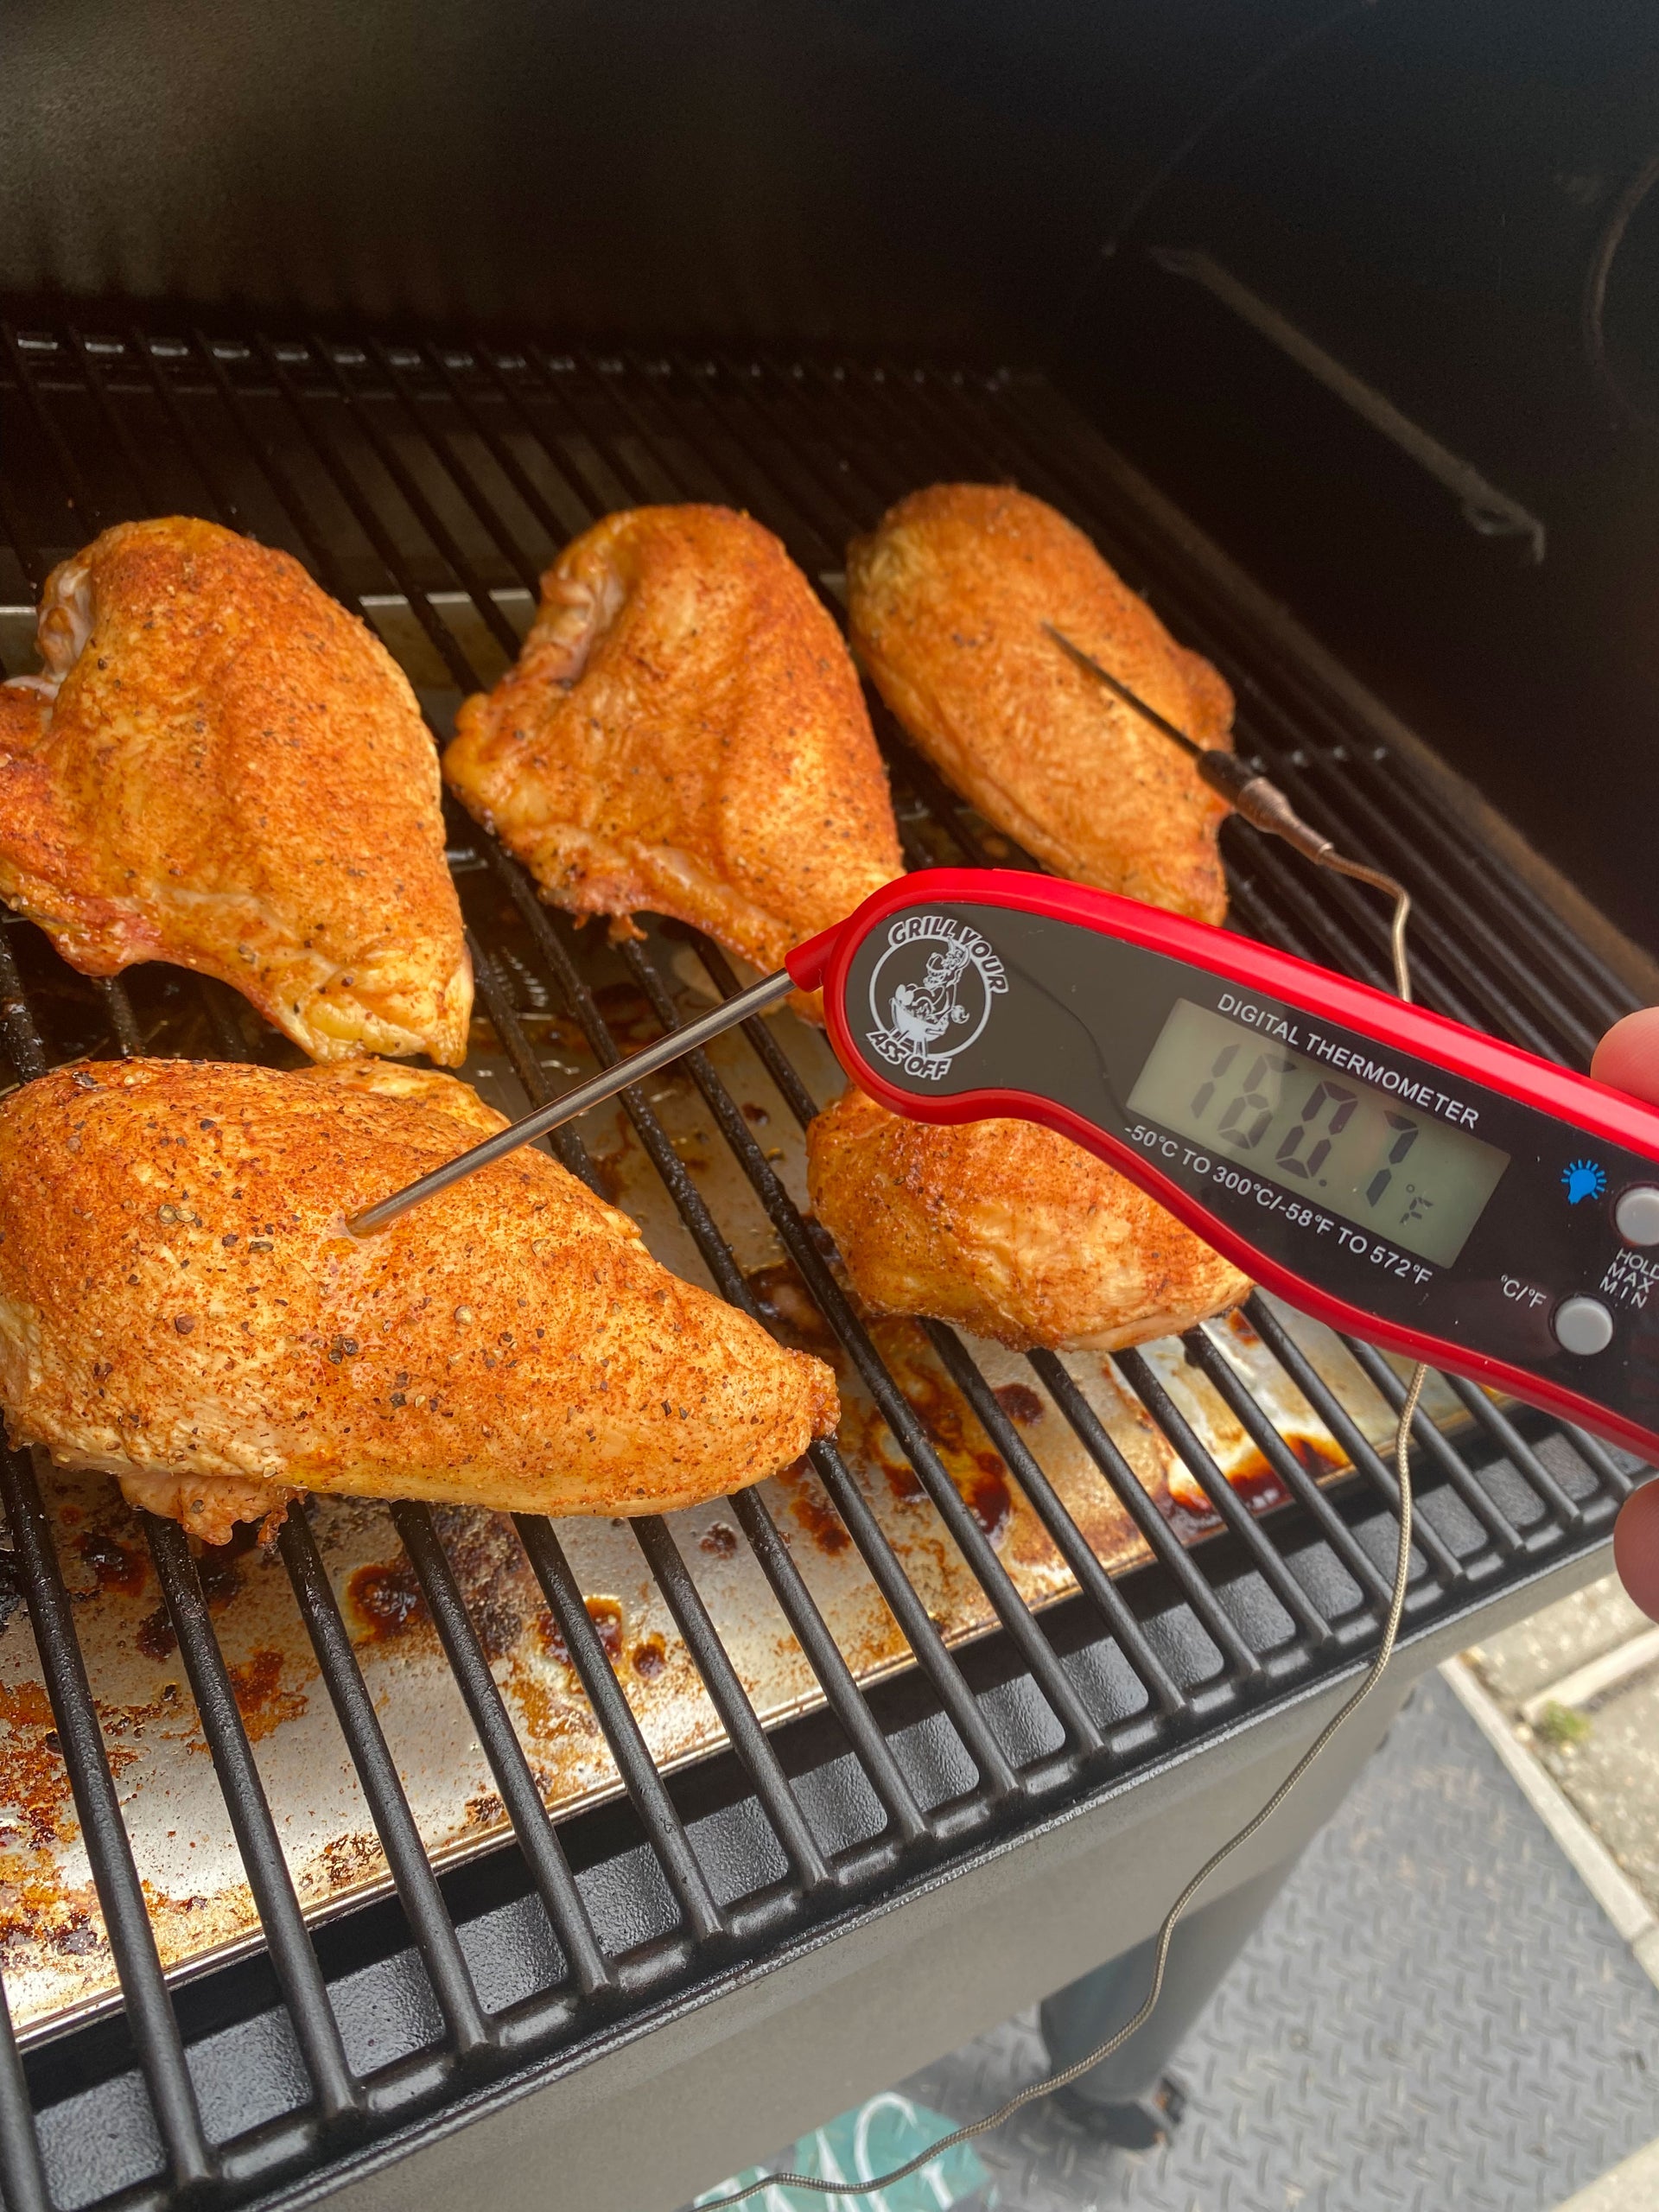 You'll want this discounted meat thermometer for grilling season